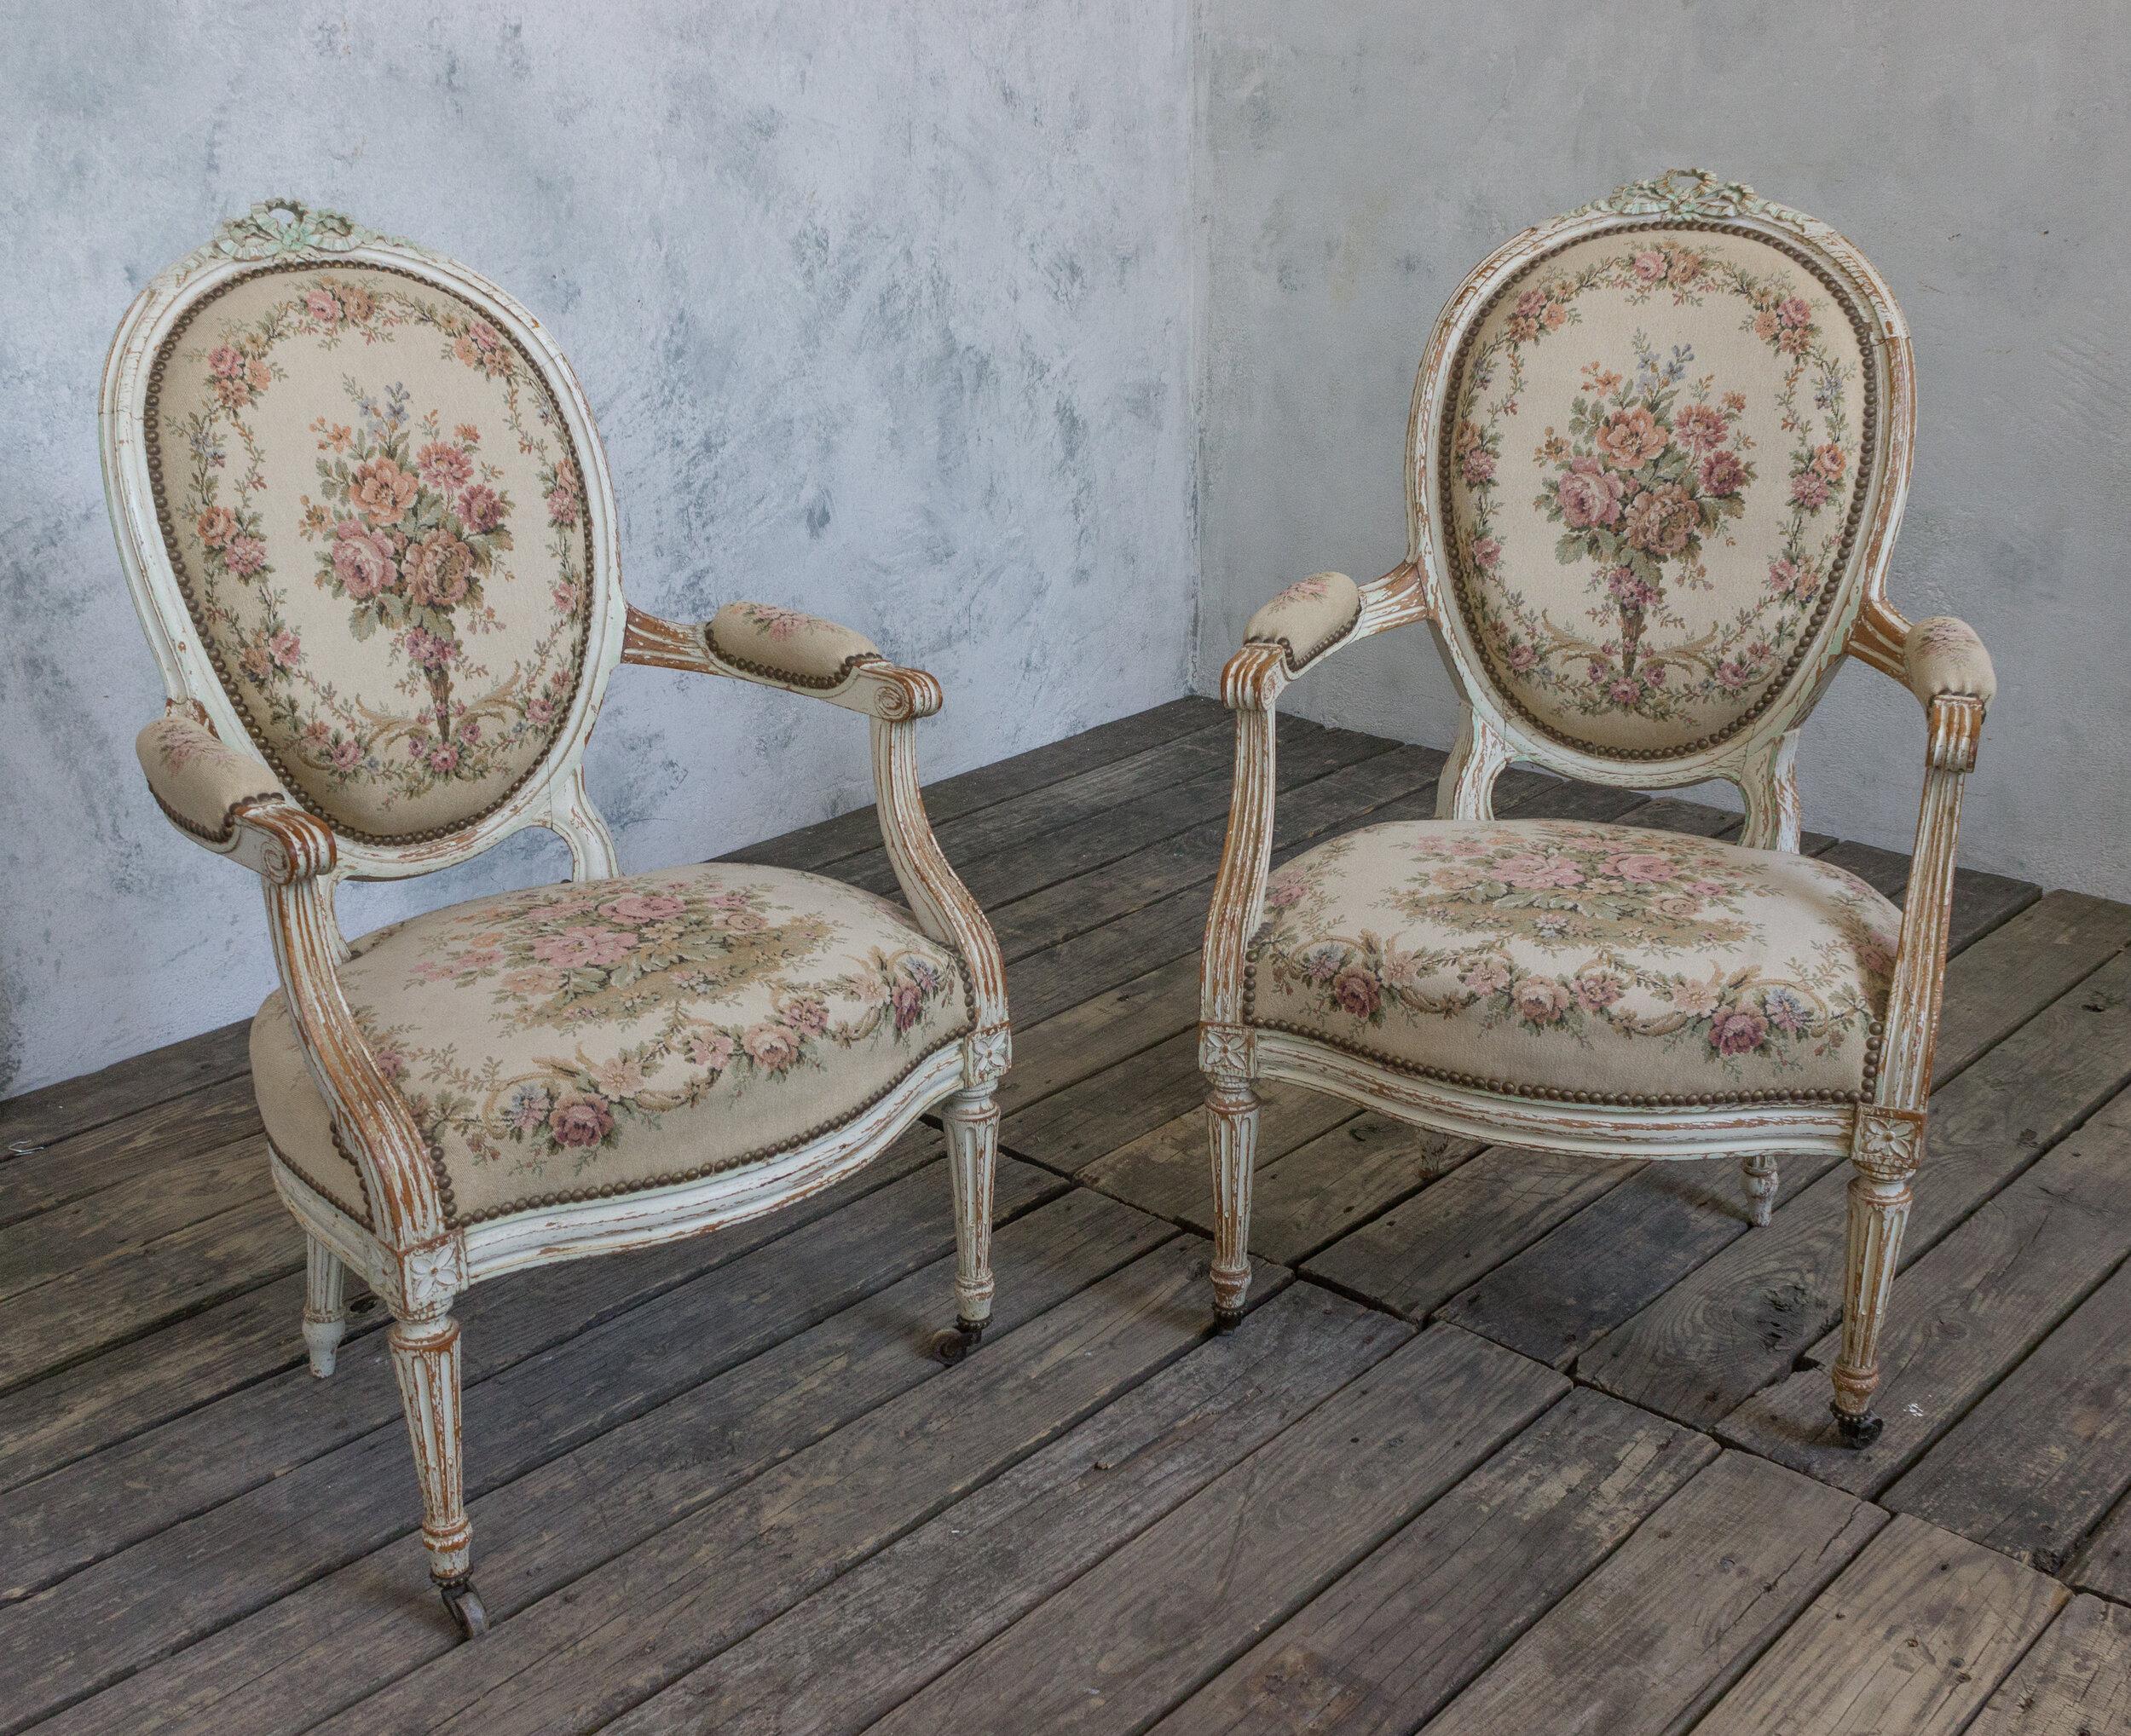 An exquisite pair of French Louis XVI style armchairs. Elevate your décor to the heights of luxury and elegance with this classic pair of 19th century French armchairs. Crafted in white washed, patinated frames rich with intricate carvings and